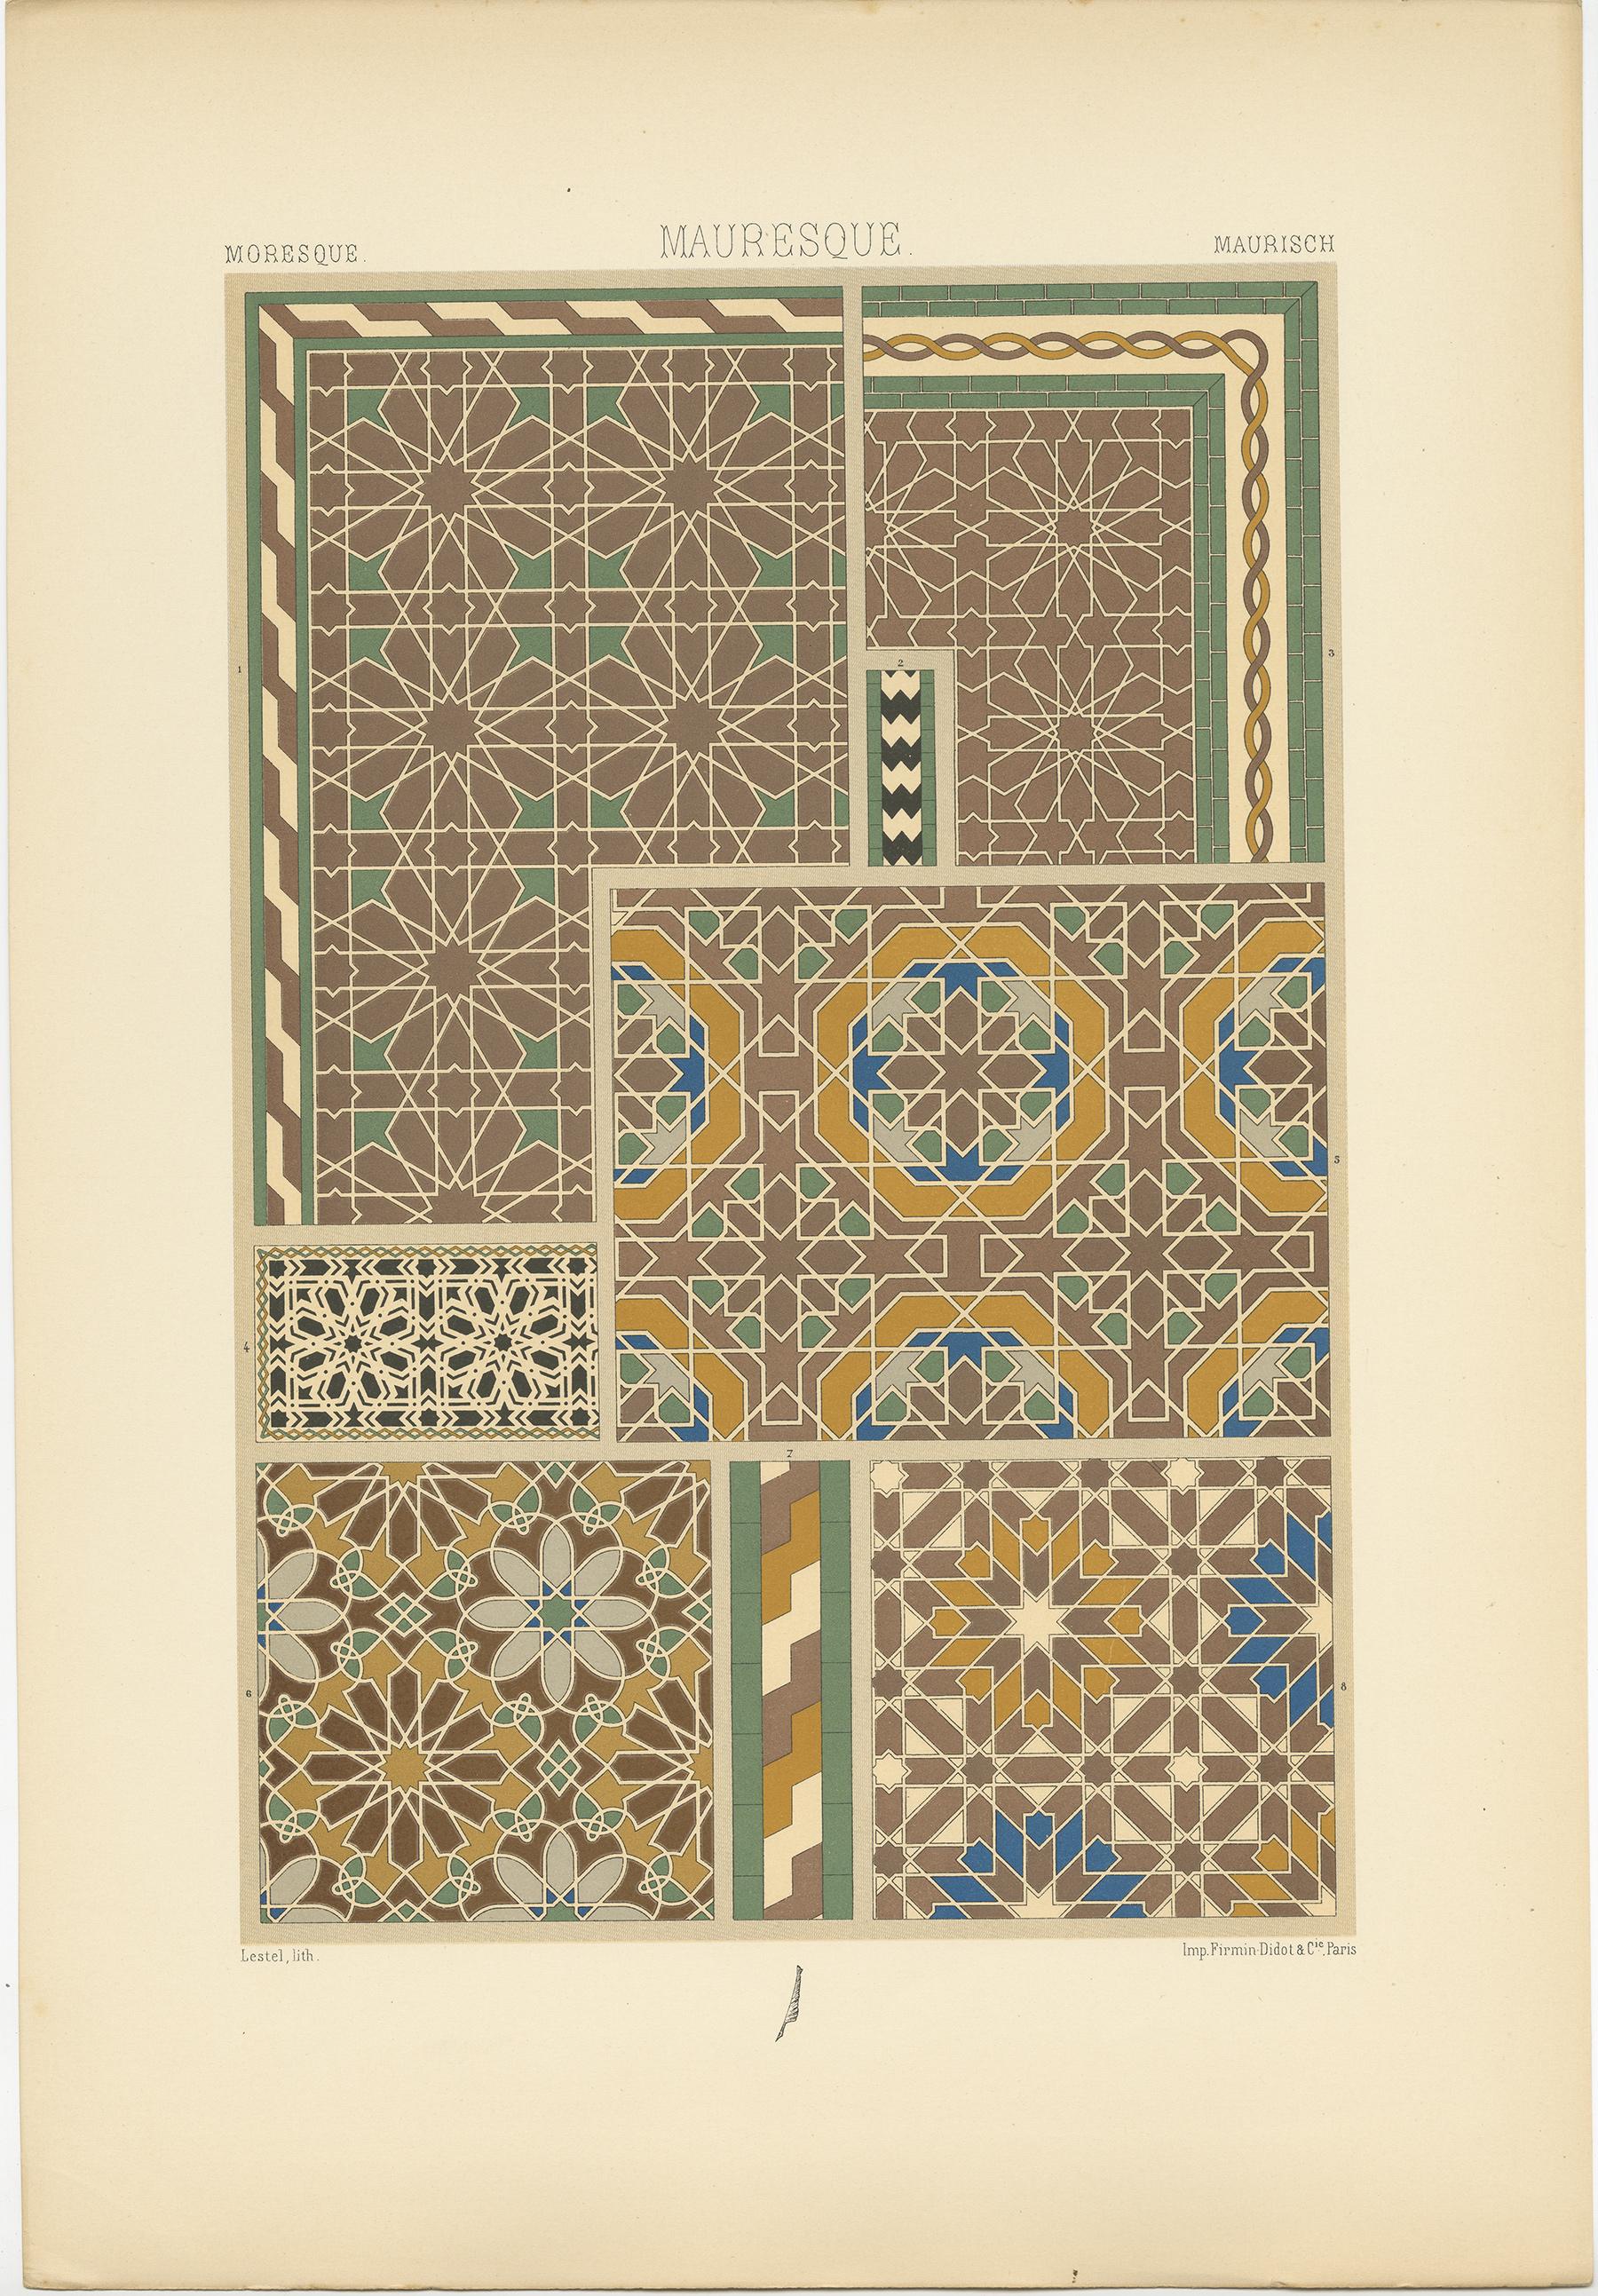 Antique print titled 'Moresque - Mauresque - Maurisch'. Chromolithograph of motifs from Algerian public architecture, 13th and 14th centuries ornaments. This print originates from 'l'Ornement Polychrome' by Auguste Racinet. Published circa 1890.